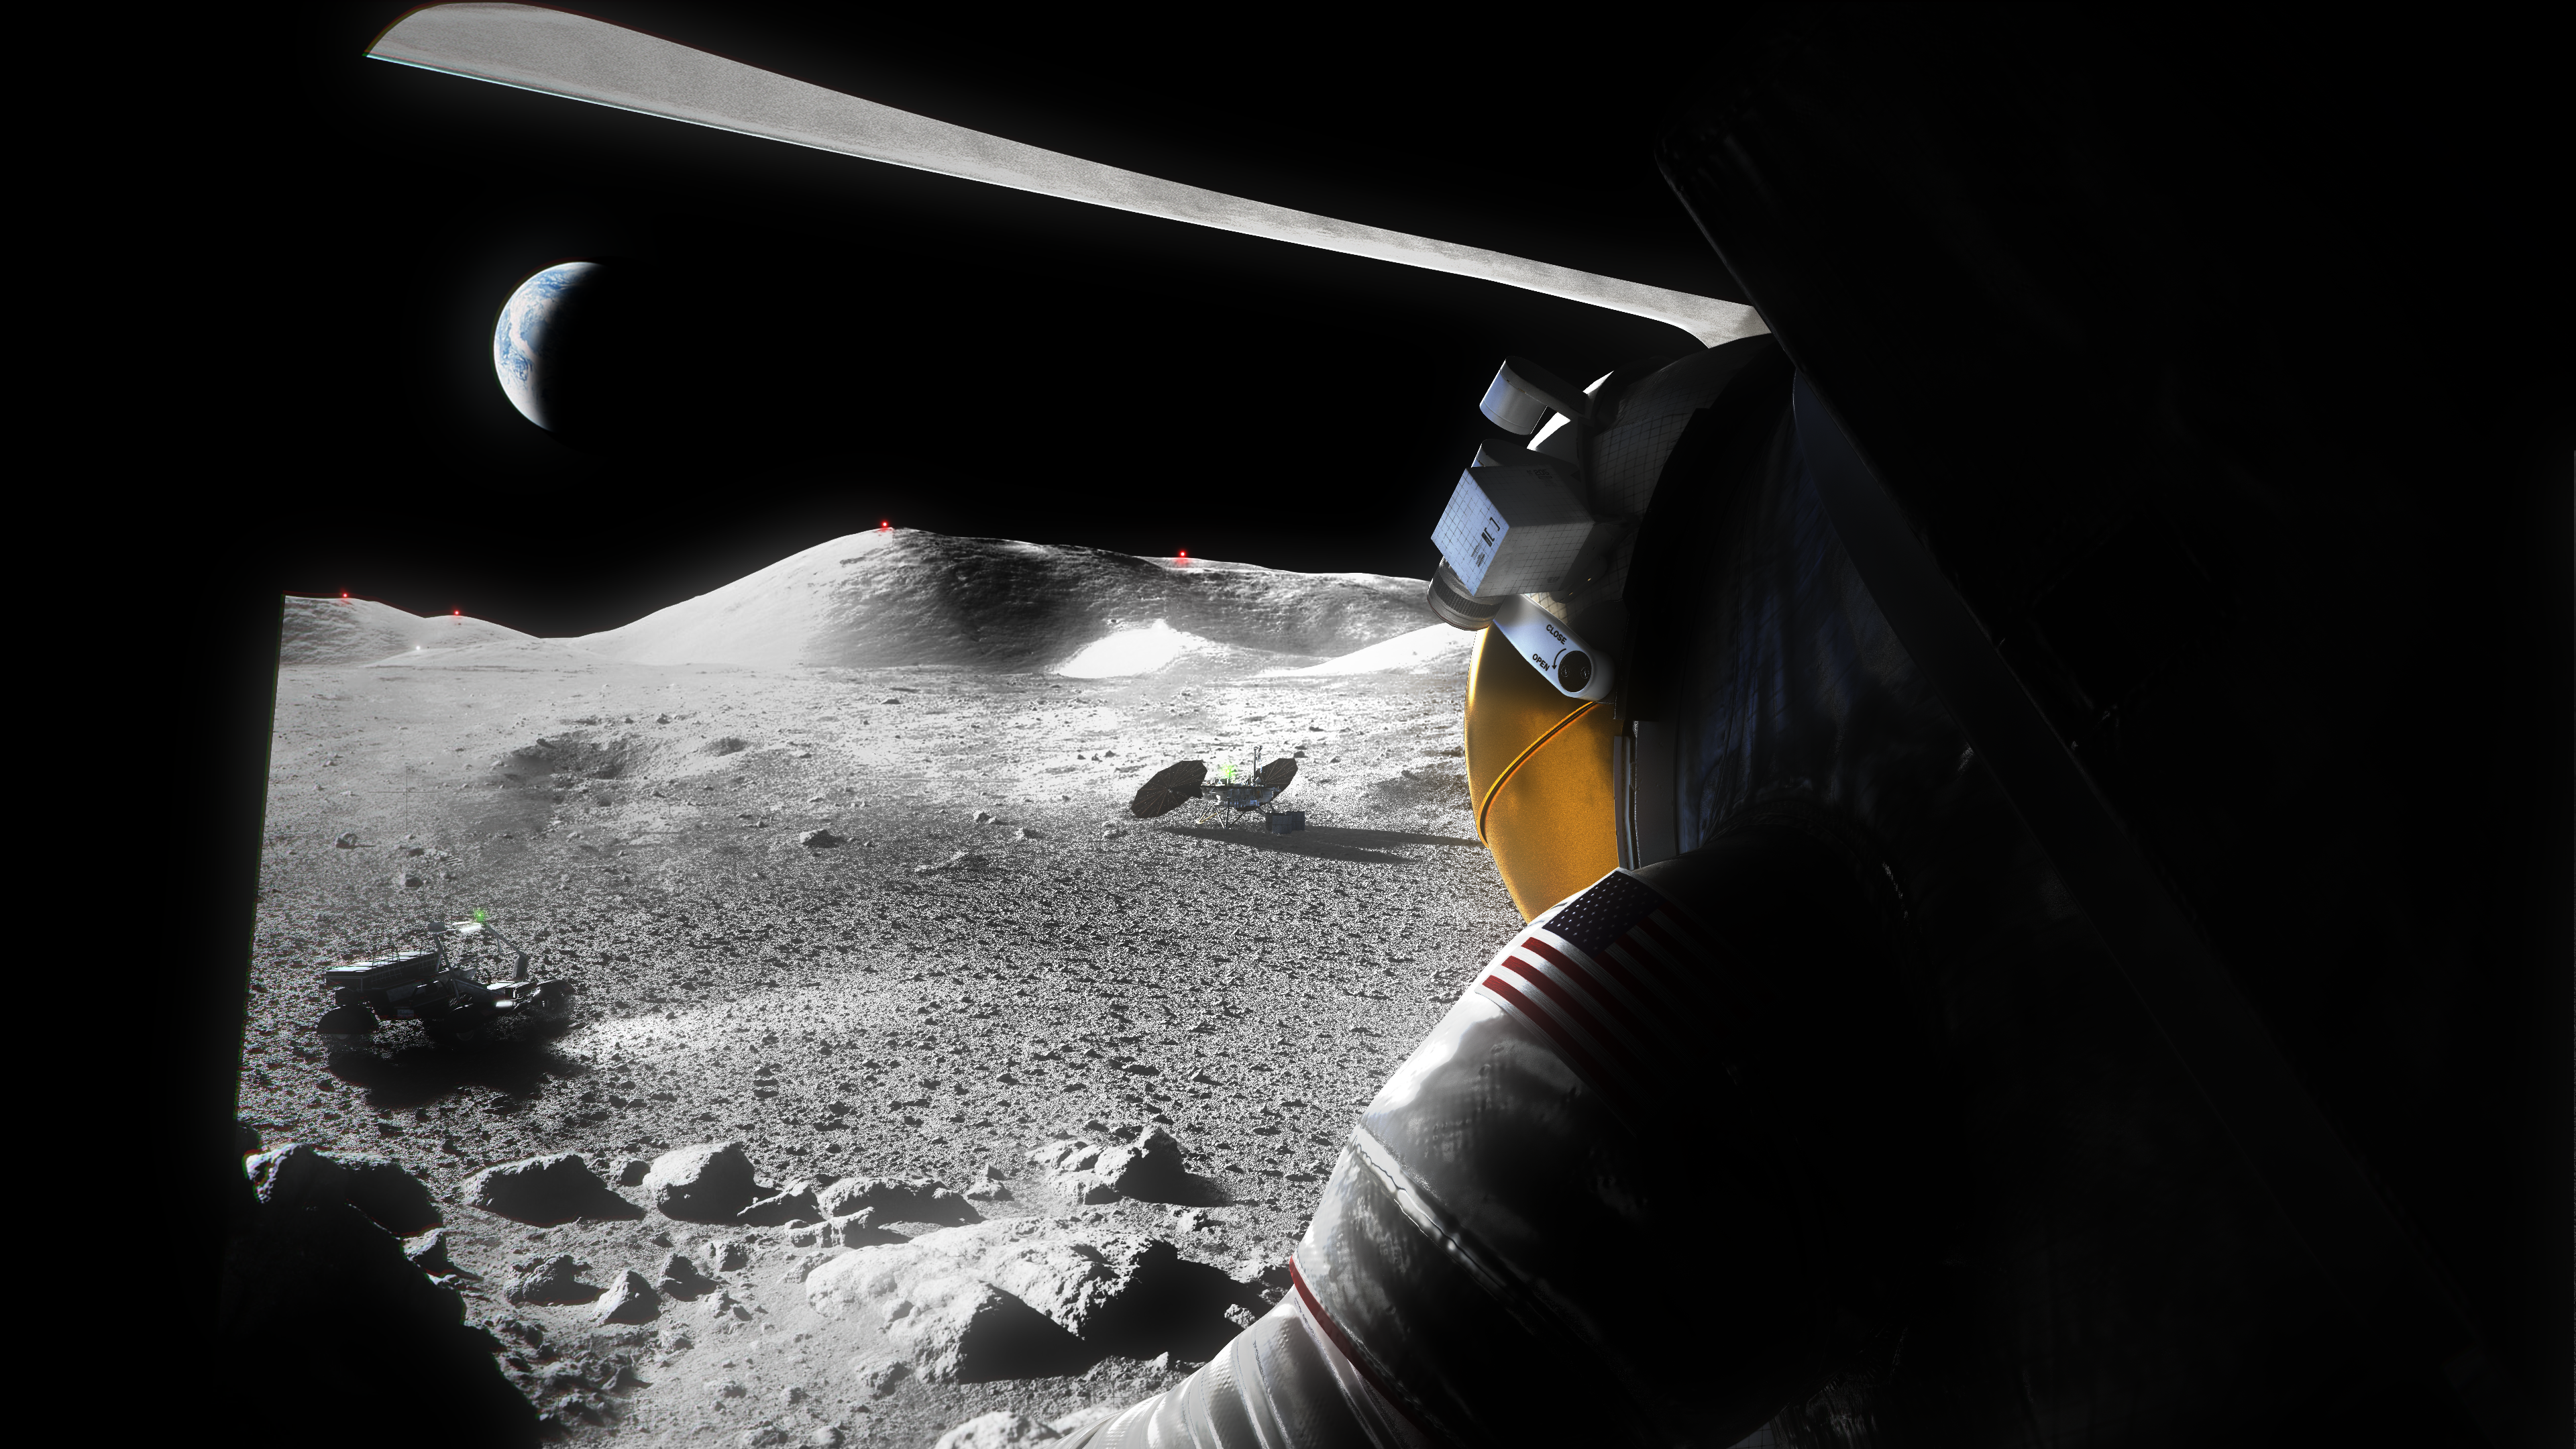 NASA Administrator, Leaders to Discuss Artemis Moon Mission Plans